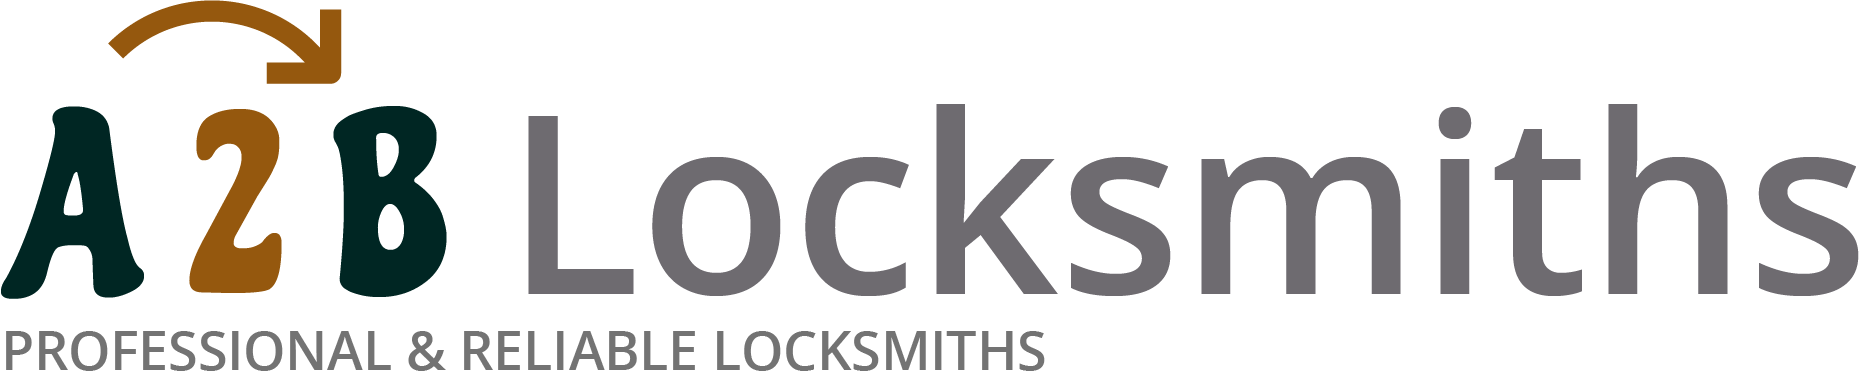 If you are locked out of house in Clitheroe, our 24/7 local emergency locksmith services can help you.